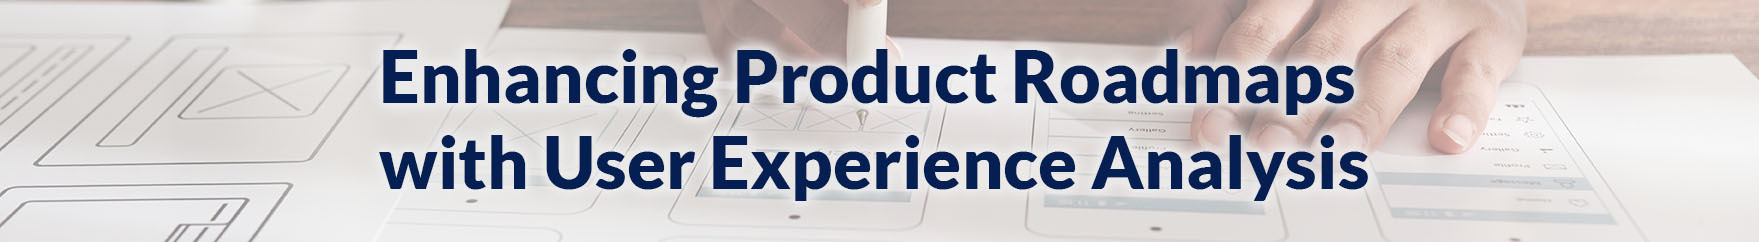 Enhancing Product Roadmaps with User Experience Analysis